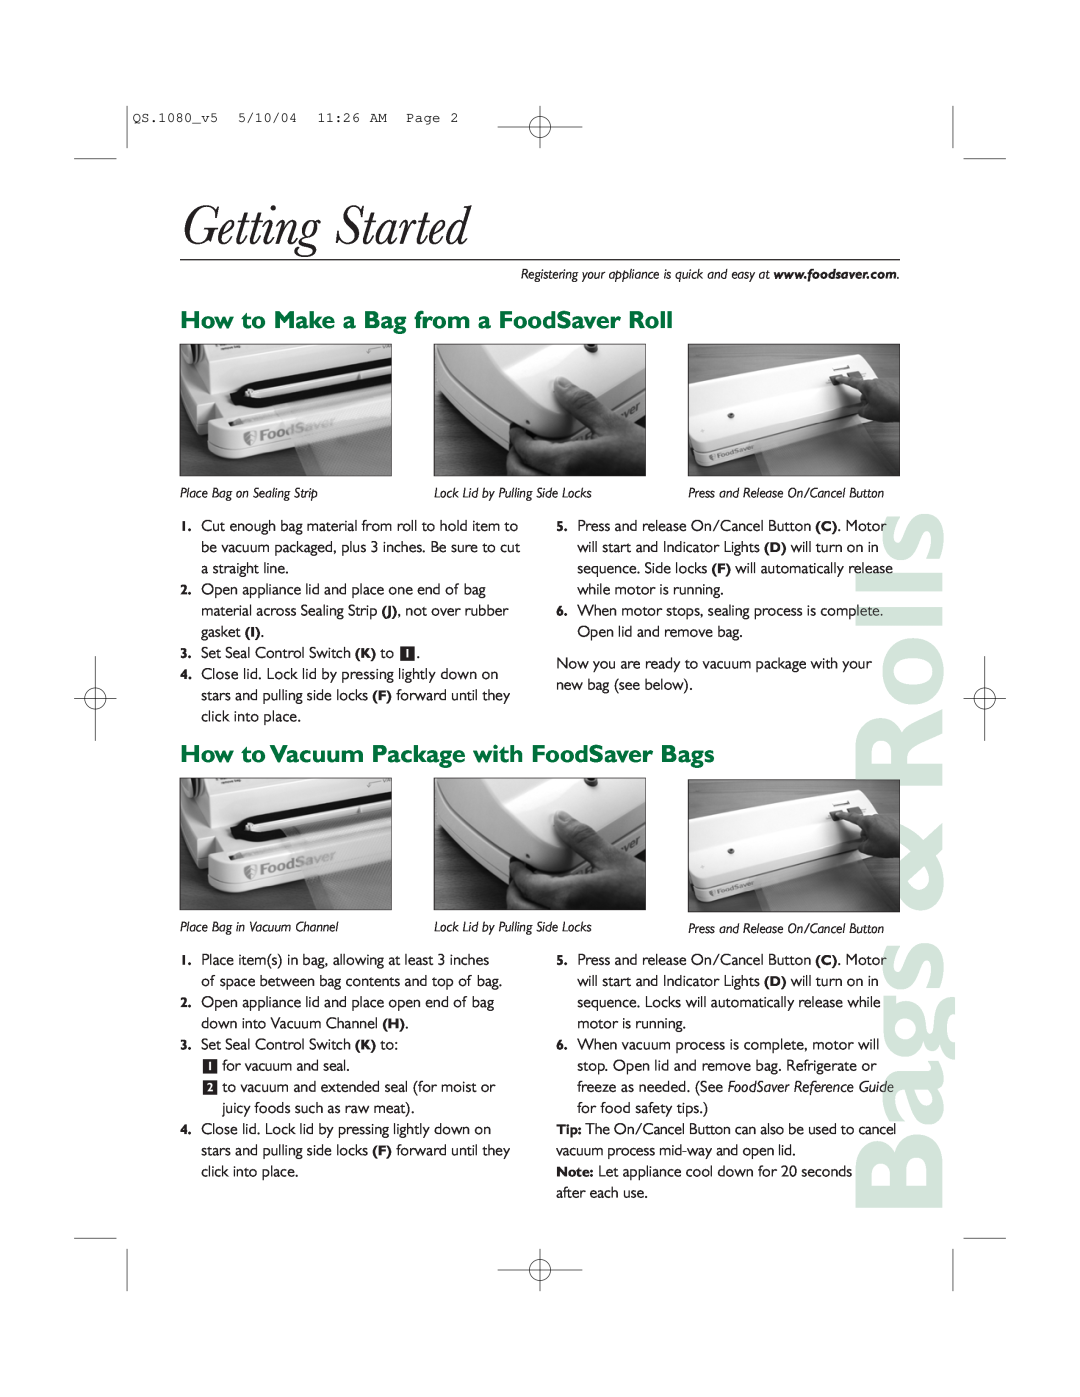 FoodSaver V1080 quick start Getting Started, How to Make a Bag from a FoodSaver Roll, Rolls 